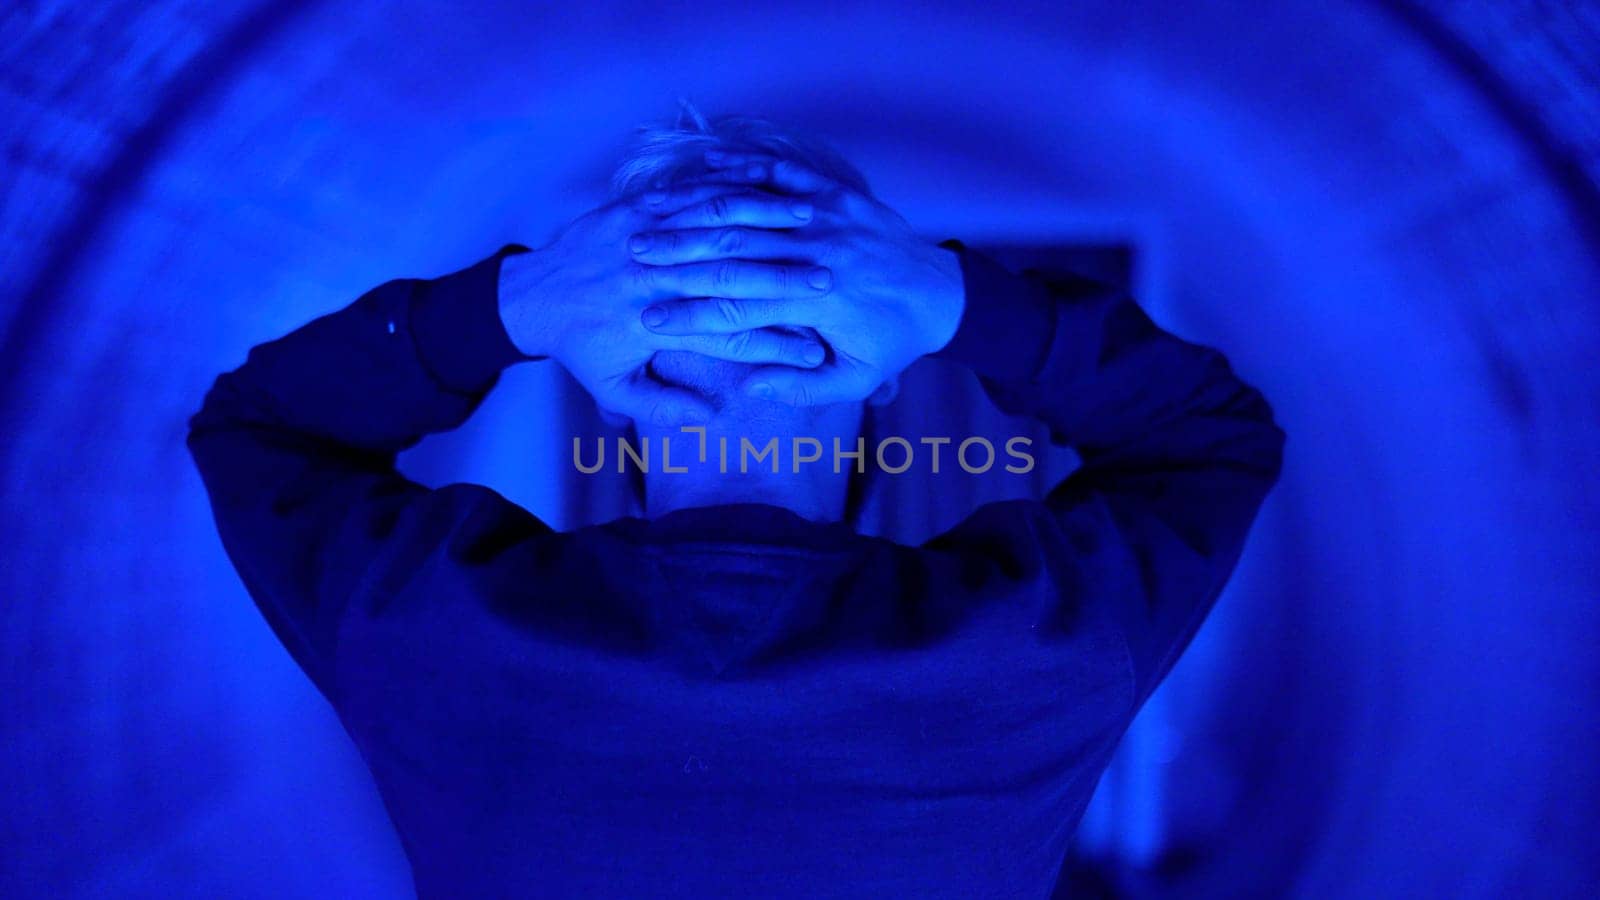 Visualization of how man with claustrophobia feels anxiety in a small room. Media. Concept of mental illness